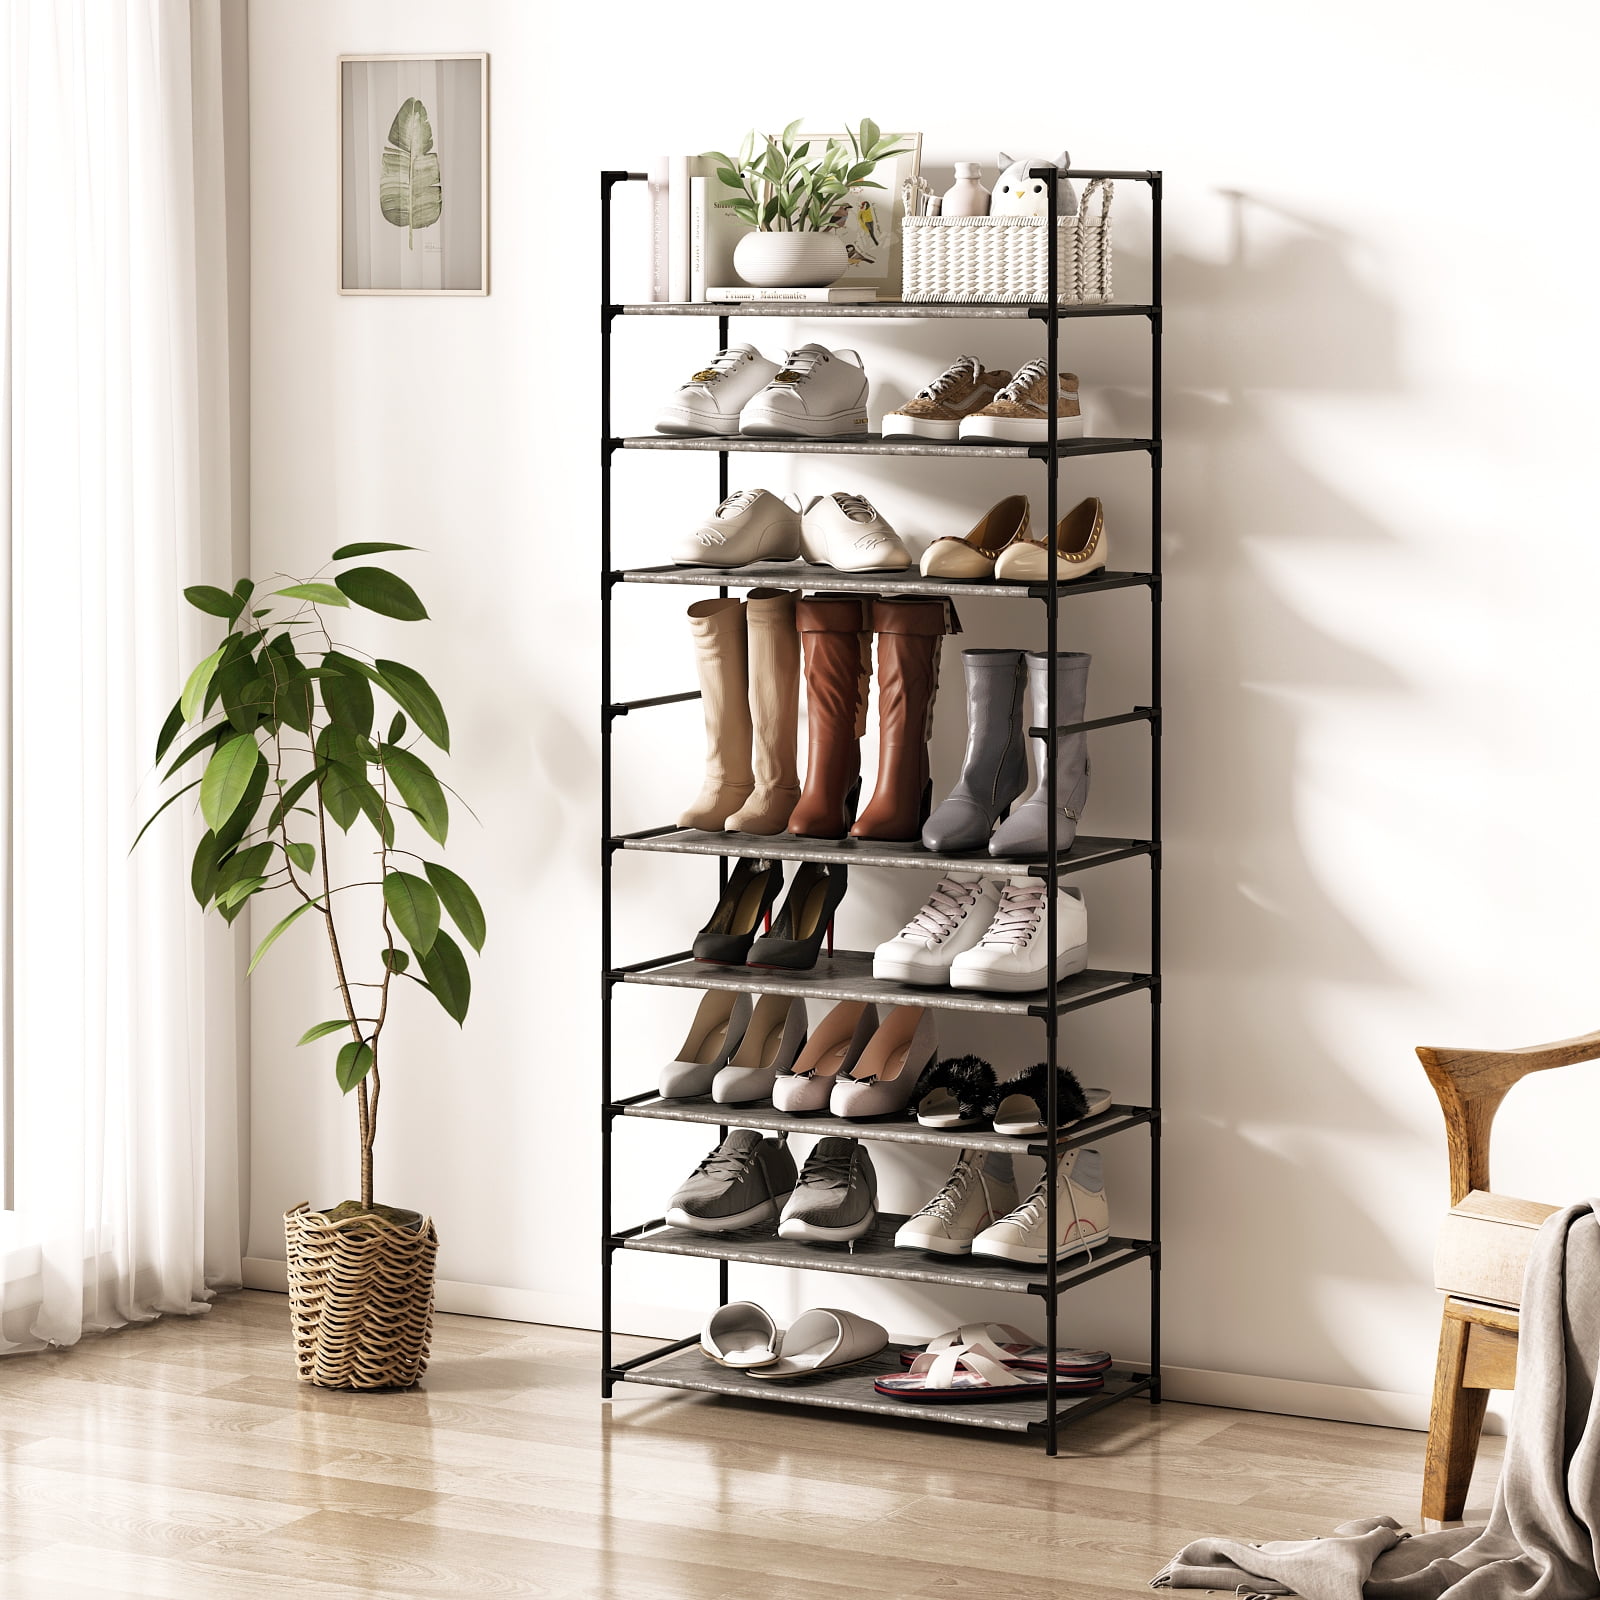 VTRIN Vertical Narrow Shoe Rack Organizer Tall Shoe Rack for Closet  Entryway 10 Tier Non-Woven Cover Shoe Shelf Holds 20-22 Pairs Free Standing  Shoe